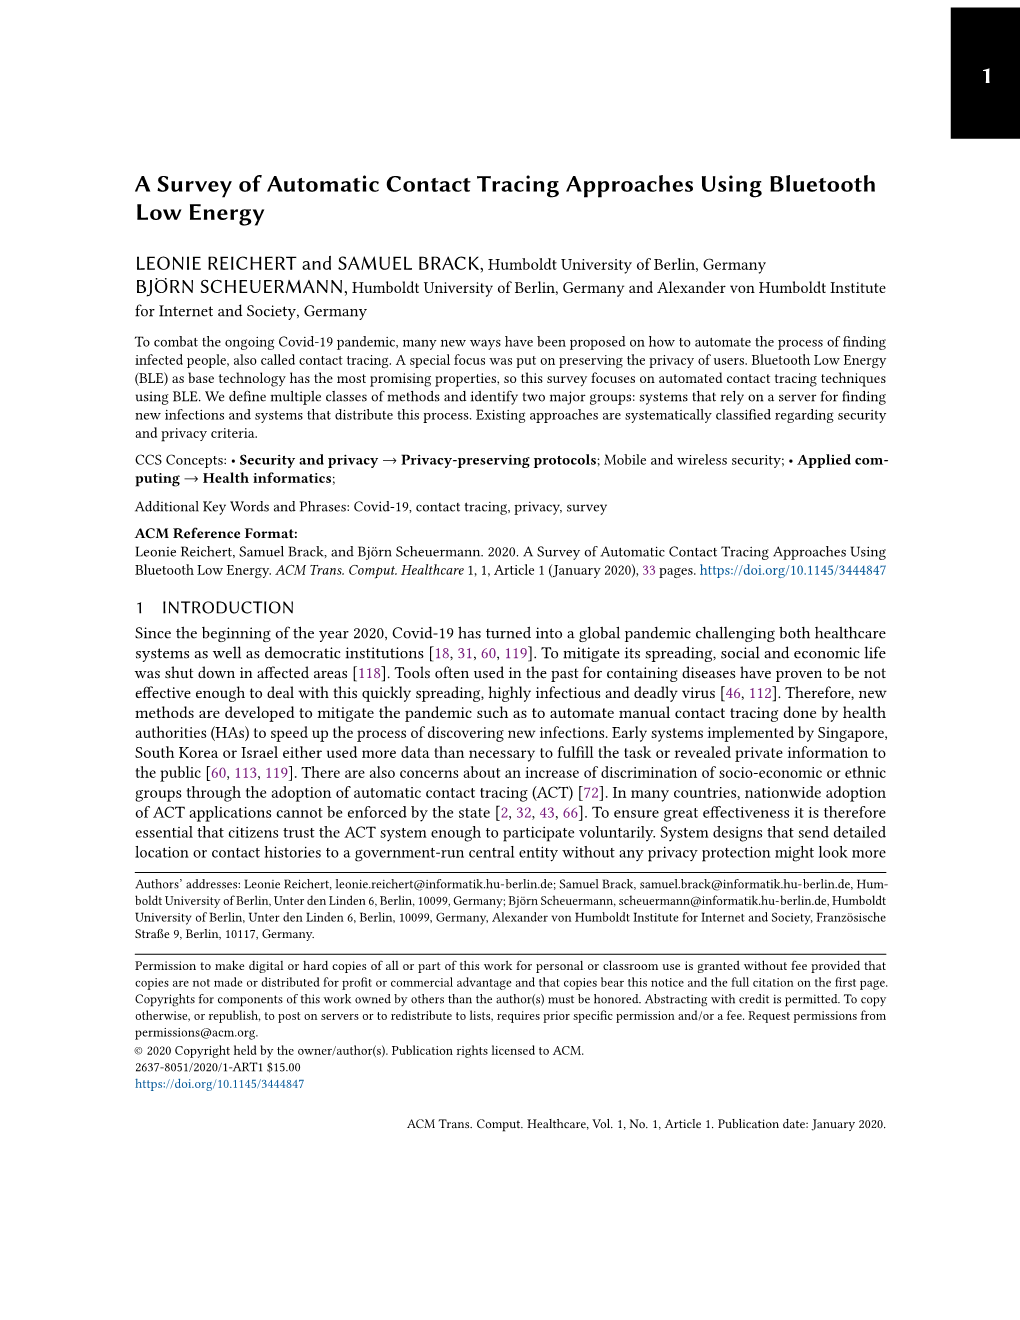 1 a Survey of Automatic Contact Tracing Approaches Using